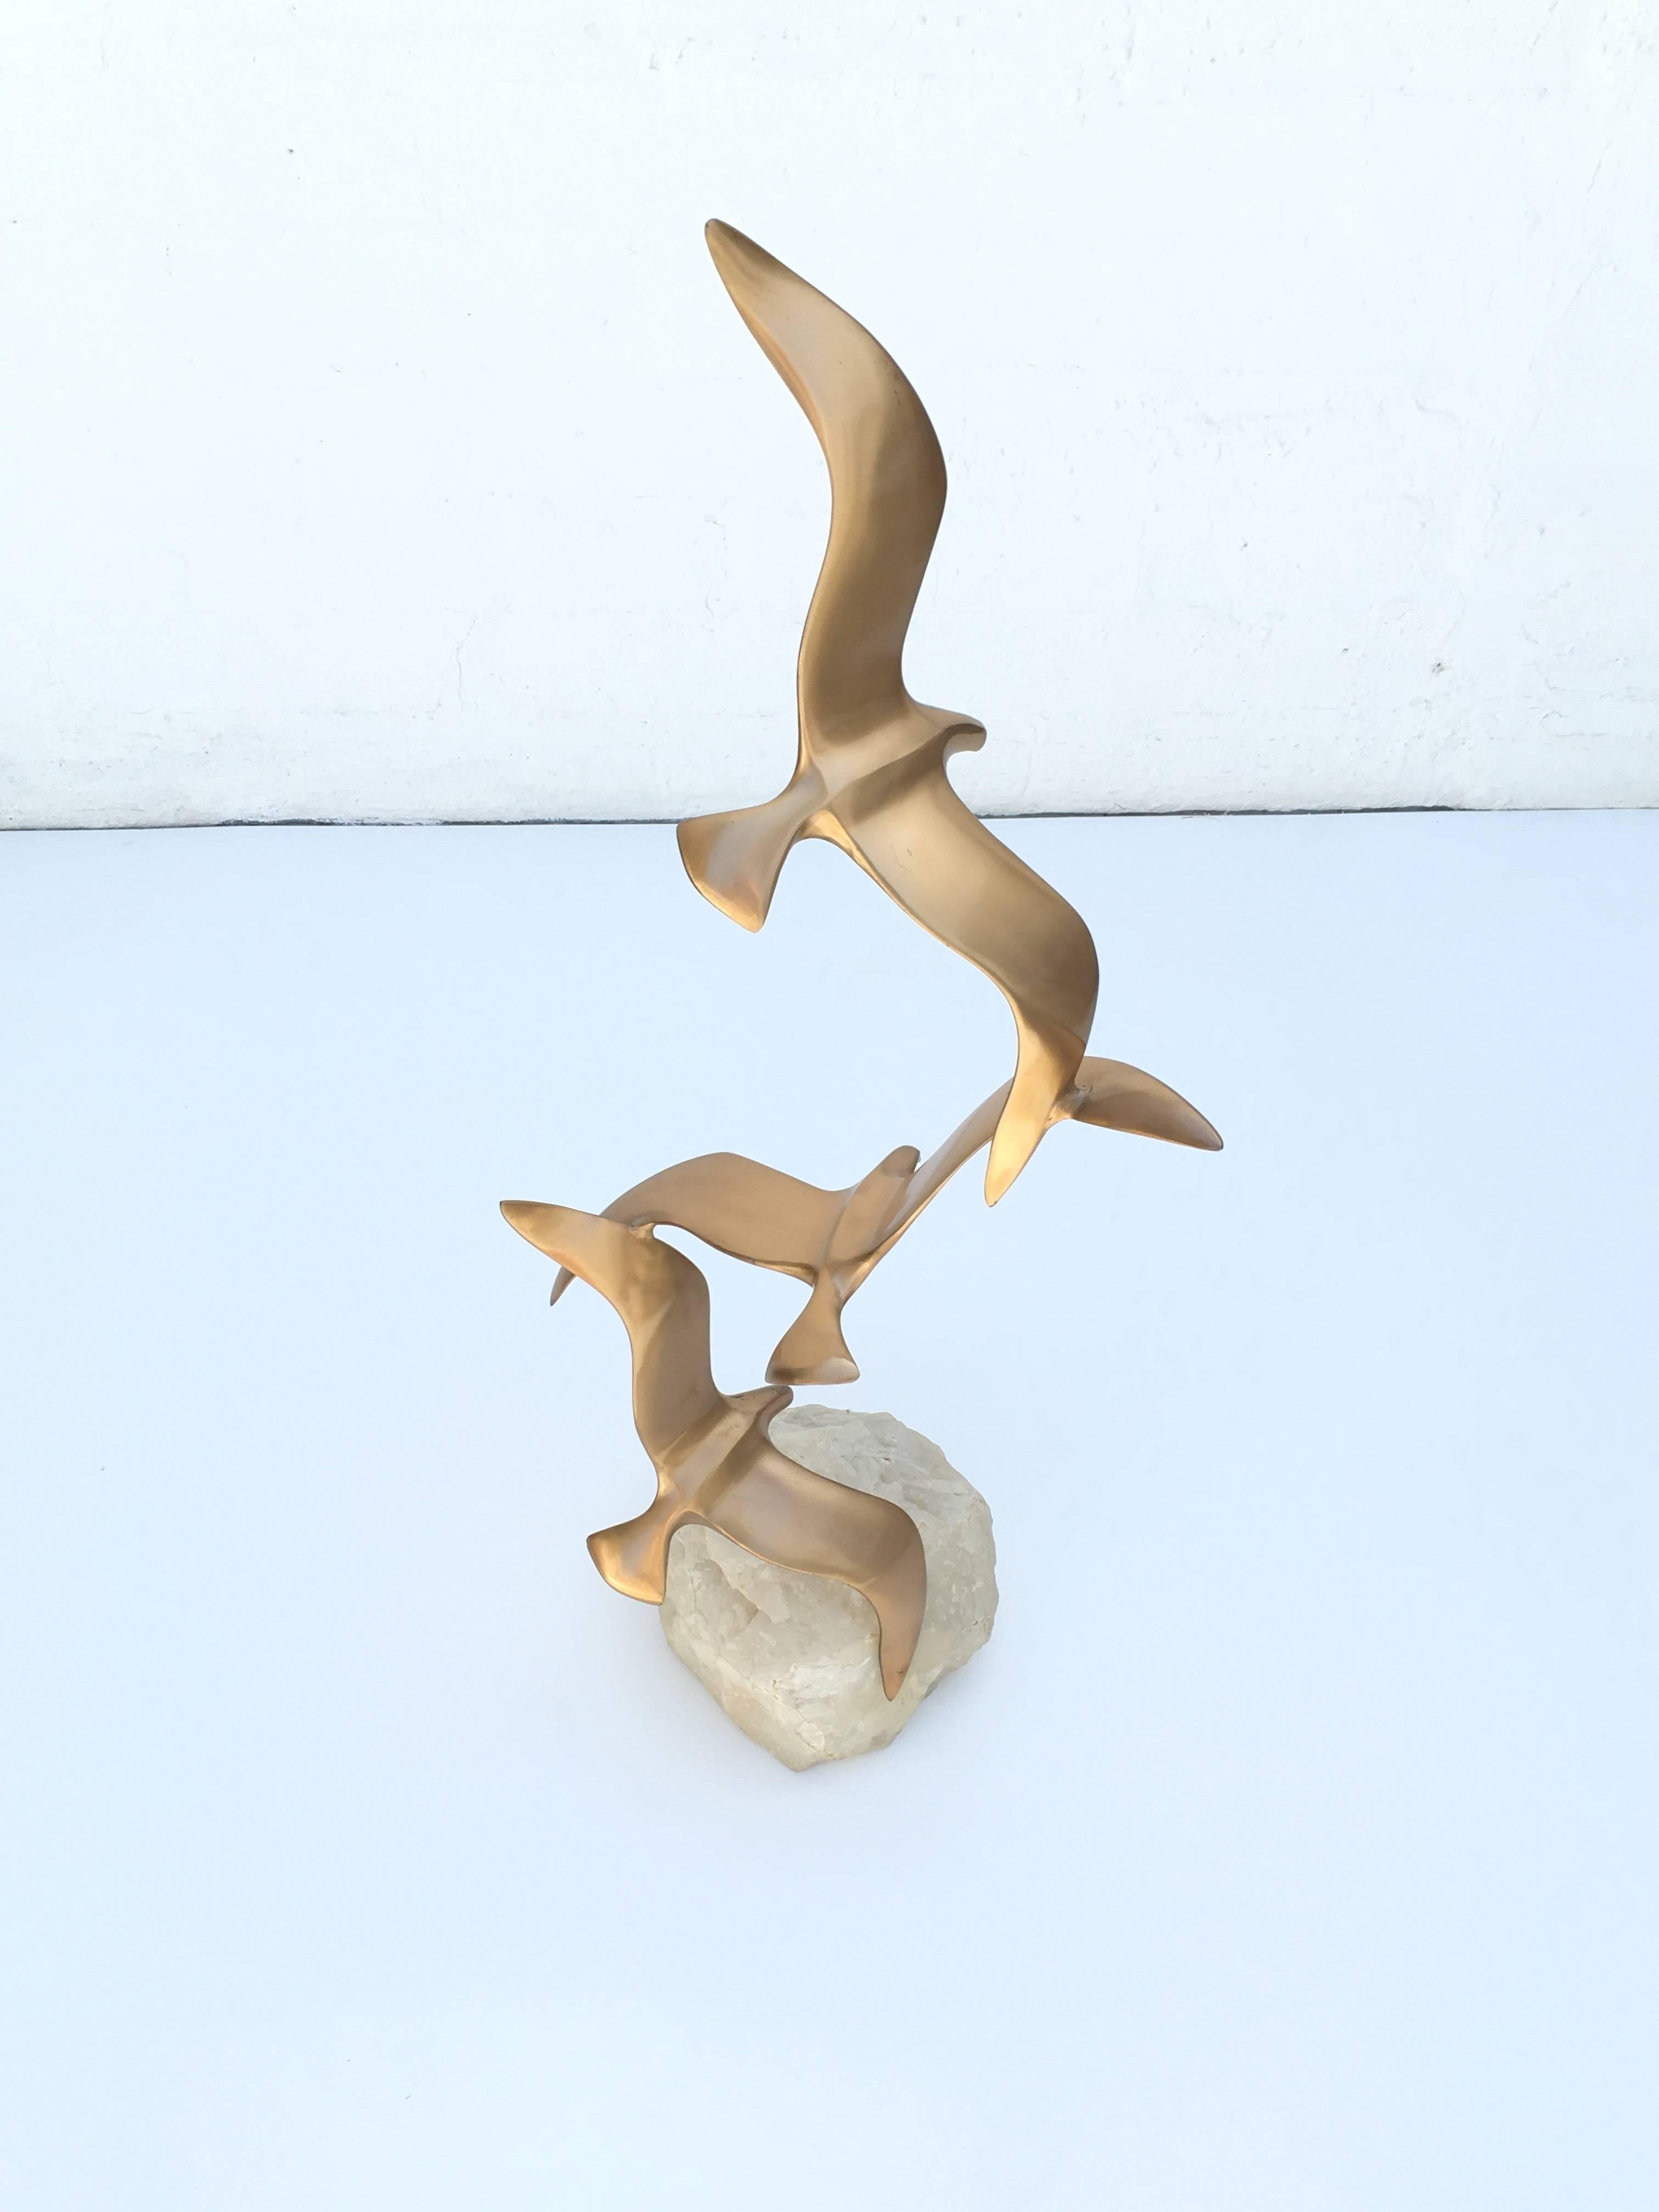 A 1970s brass and onyx sculpture signed by Curtis Jere.
The base and the birds do come apart.